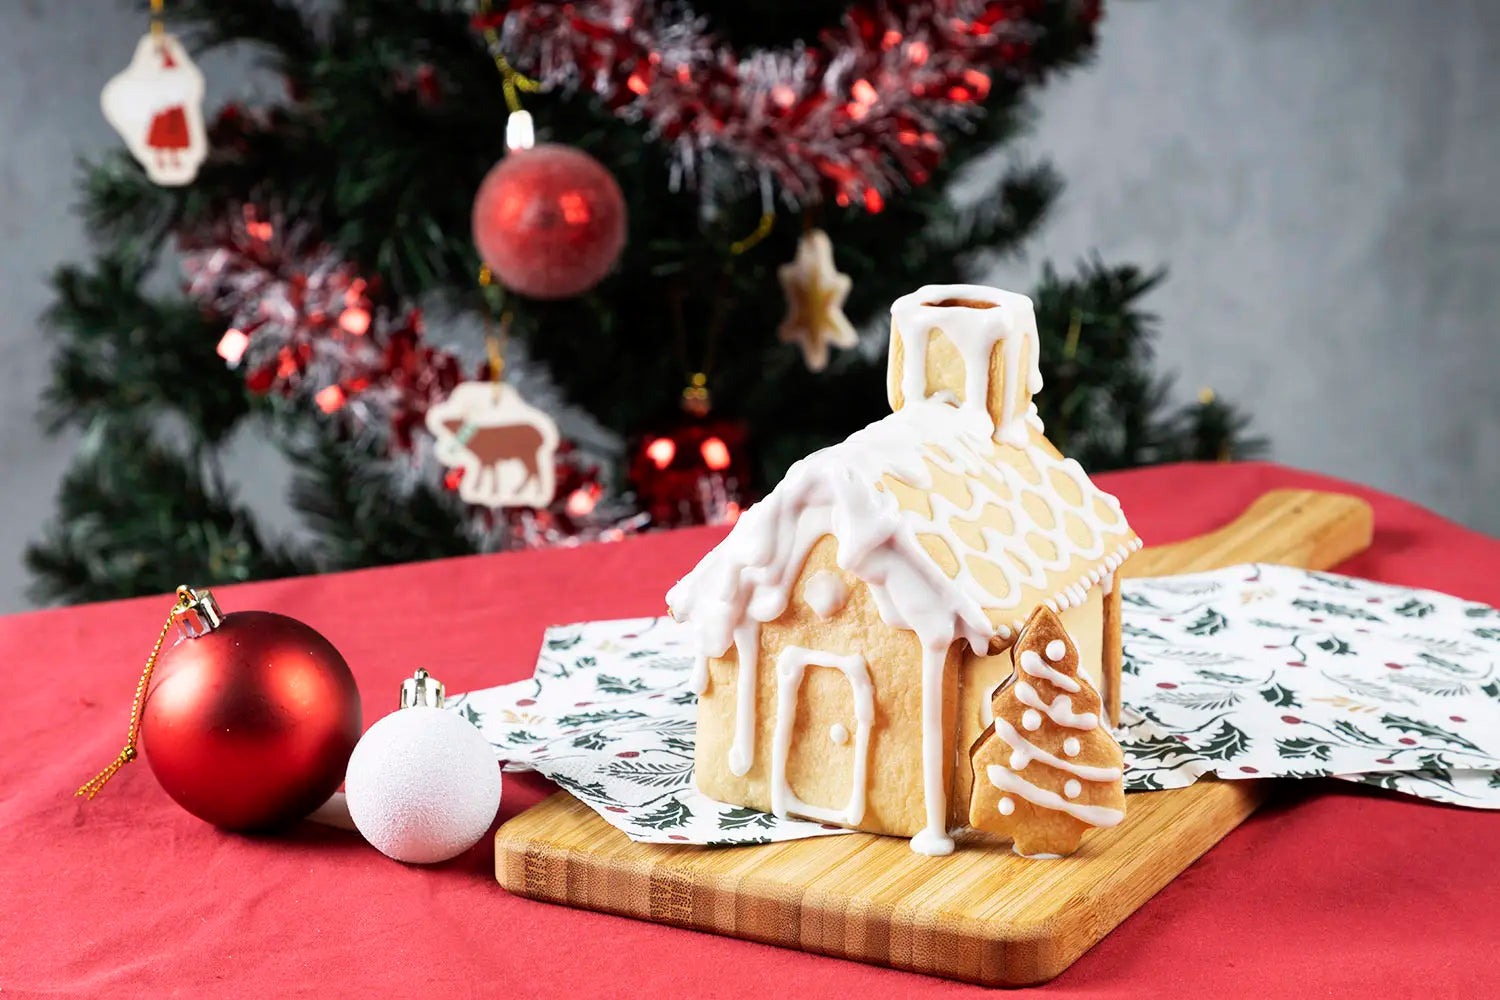 How to buy your children's love with a cookie house this Christmas